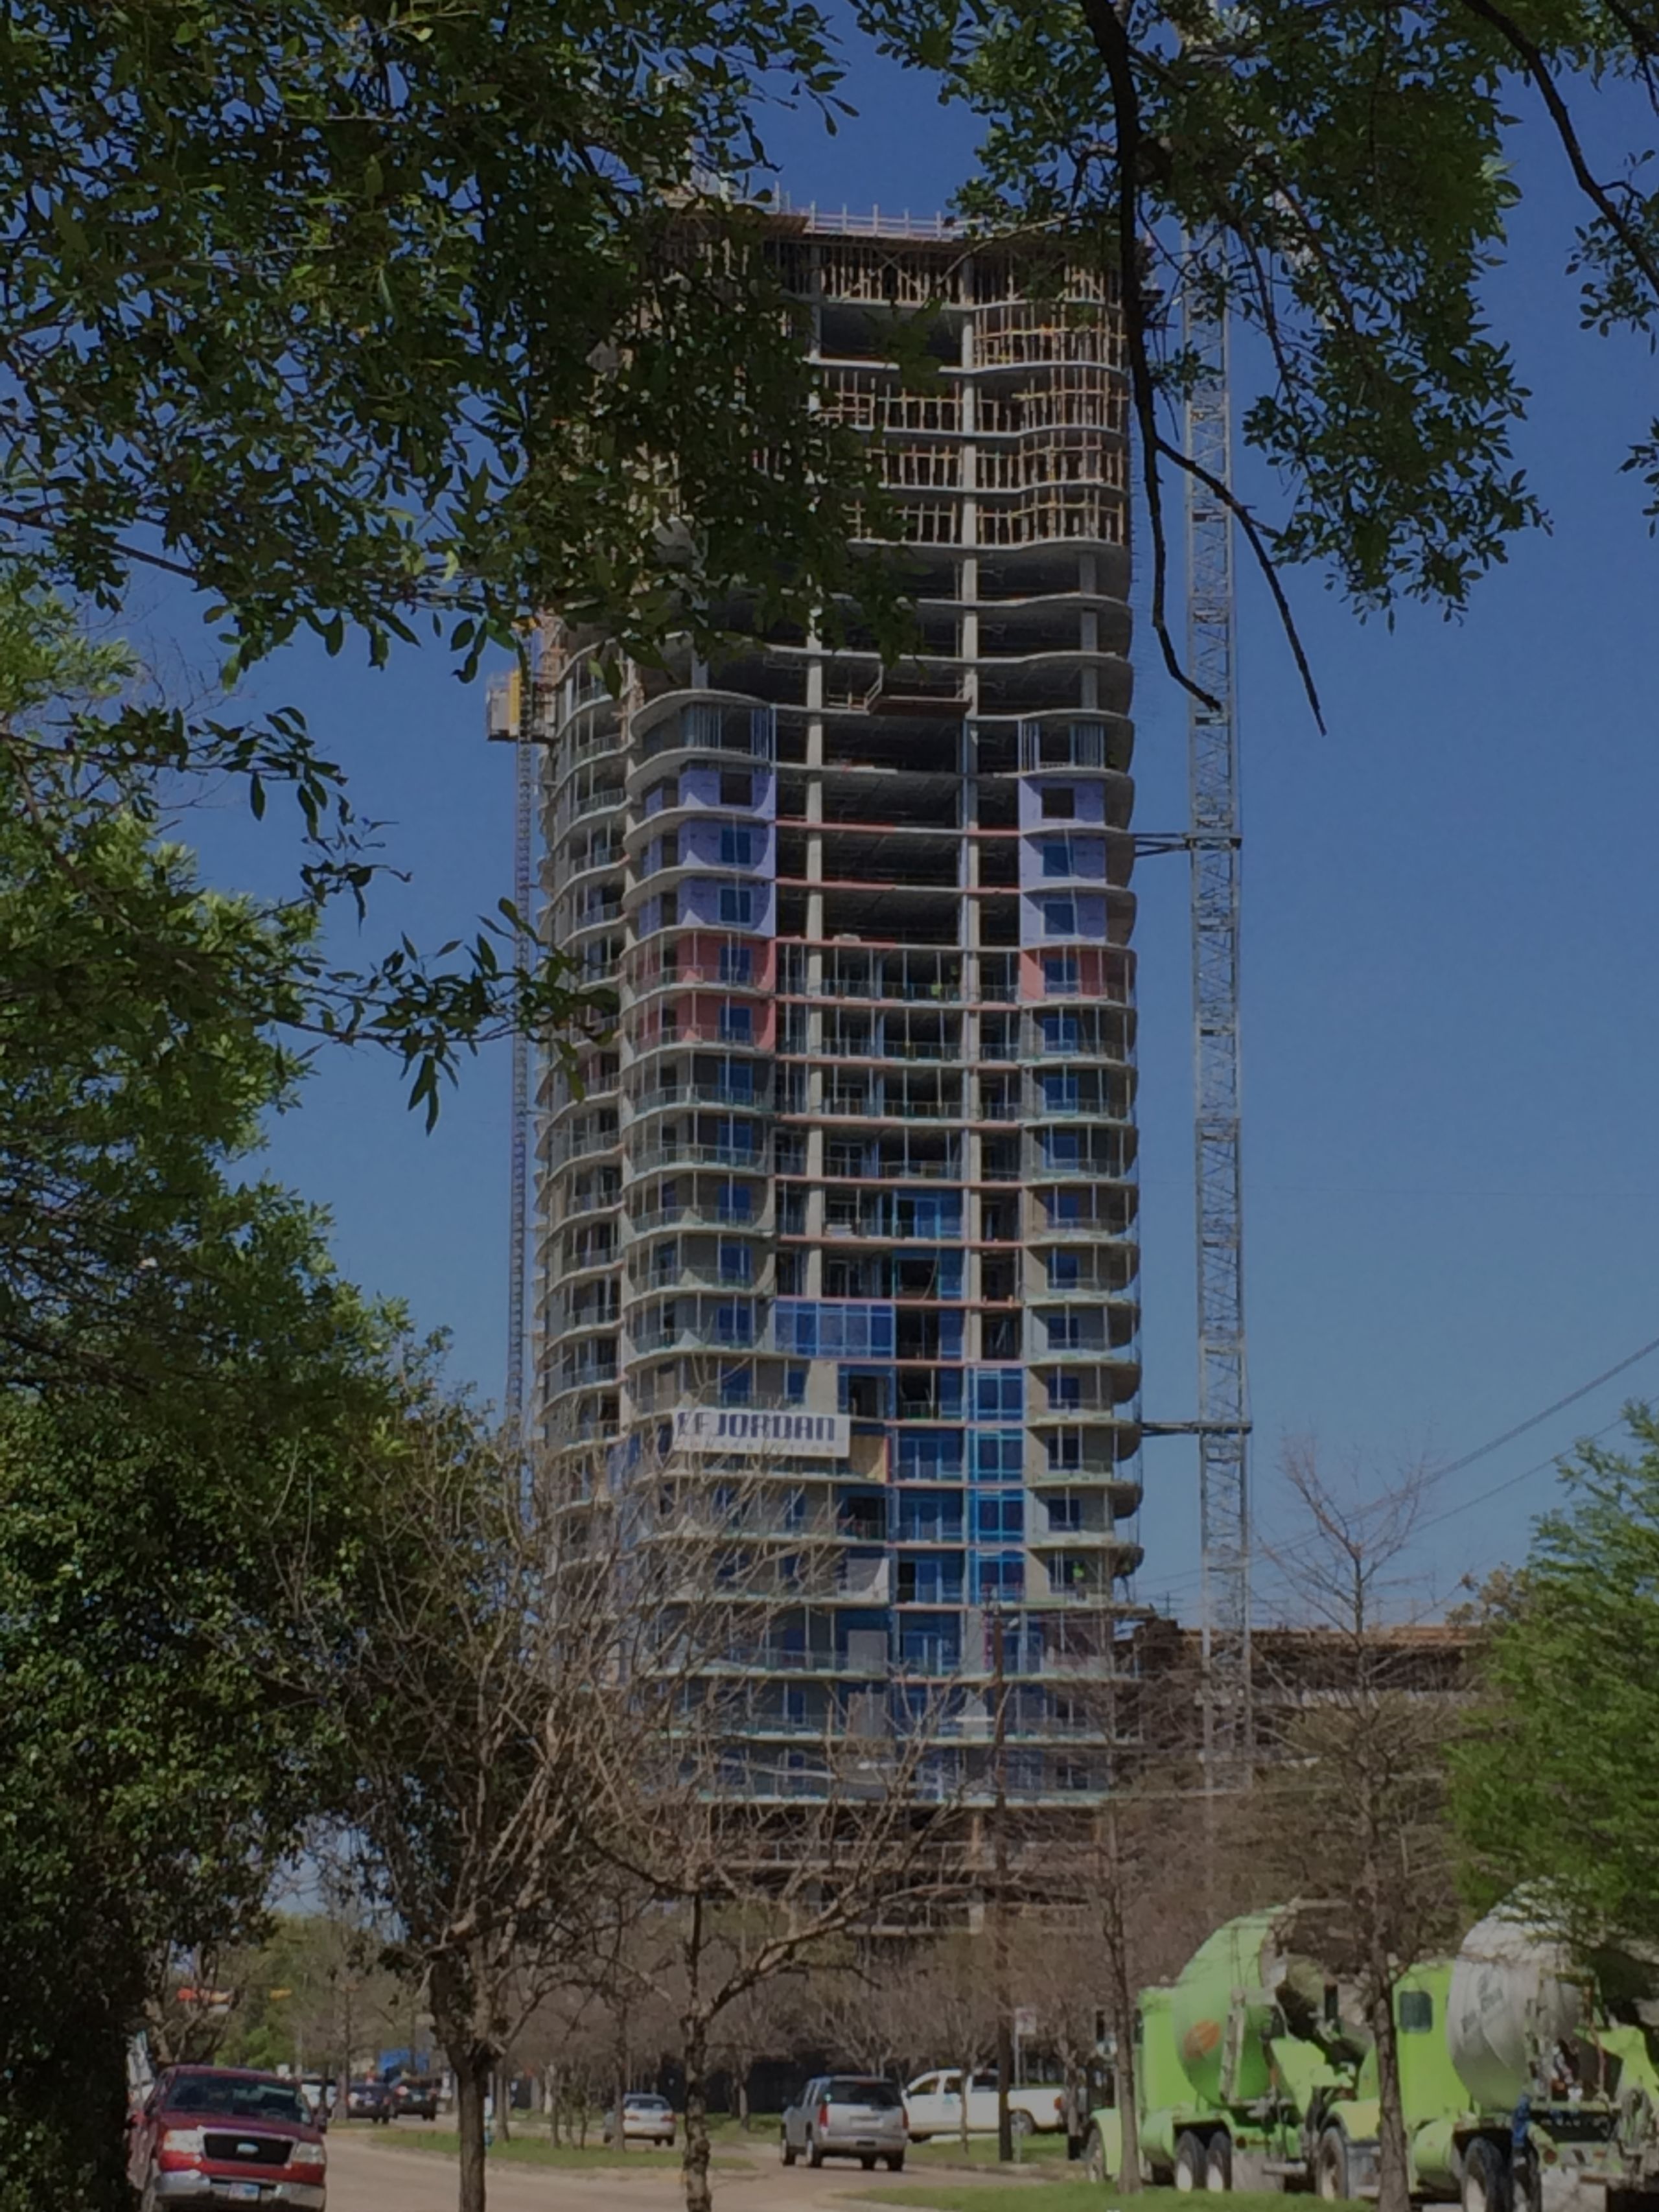 Newest High Rises Going Up in Dallas